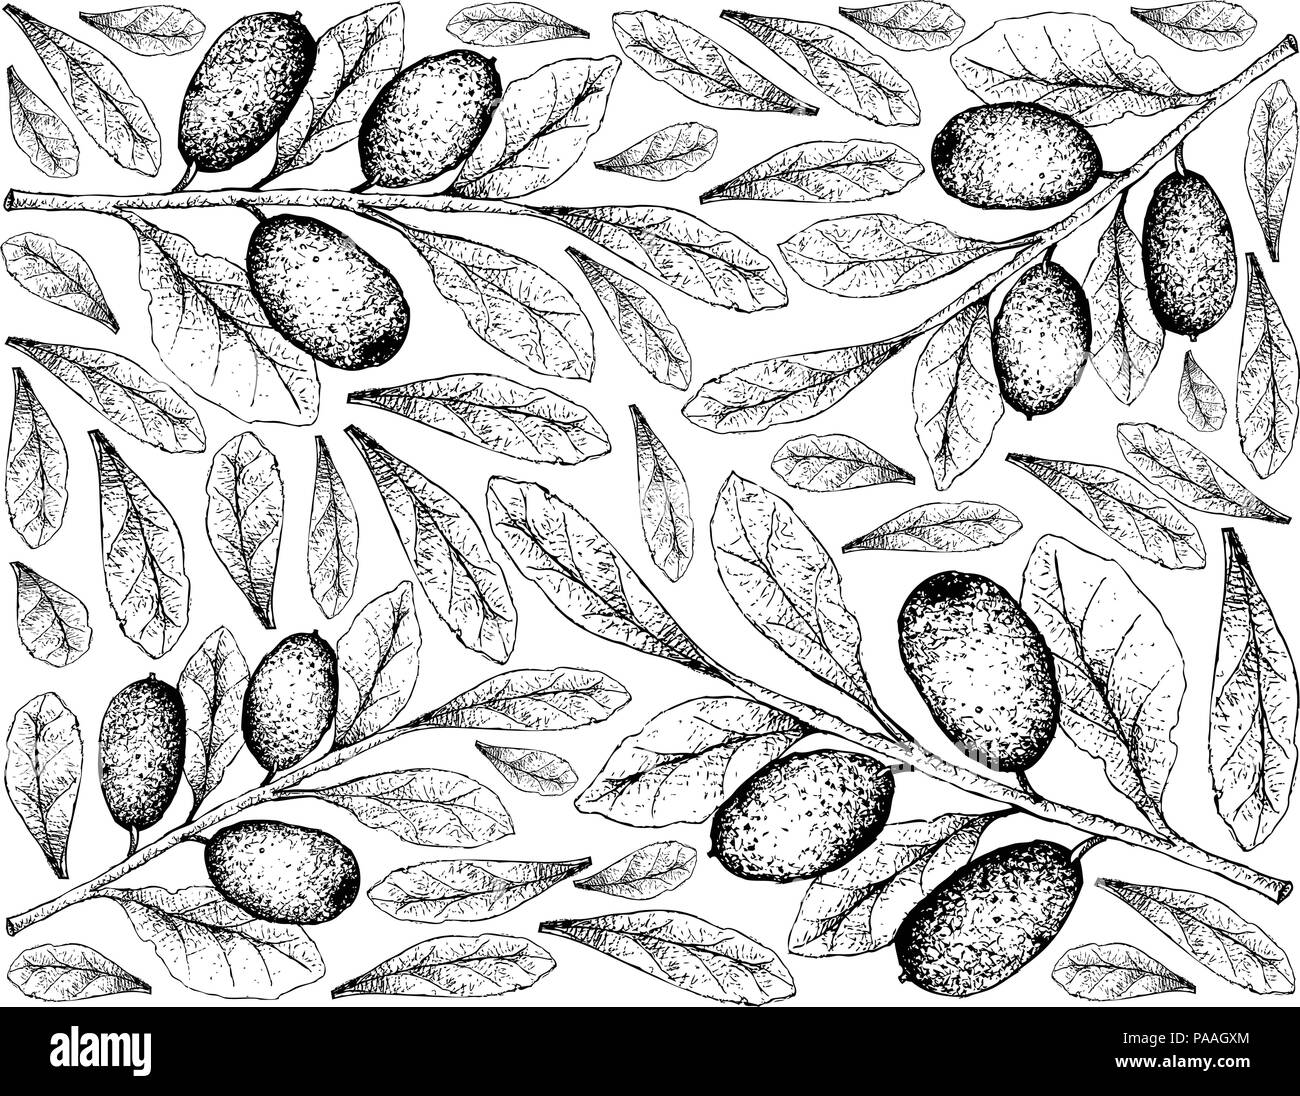 Tropical Fruits, Illustration Wallpaper of Hand Drawn Sketch Fresh Elaeagnus Ebbingei, Oleaster or Ebbings Silverberry Fruits Isolated on White Backgr Stock Vector